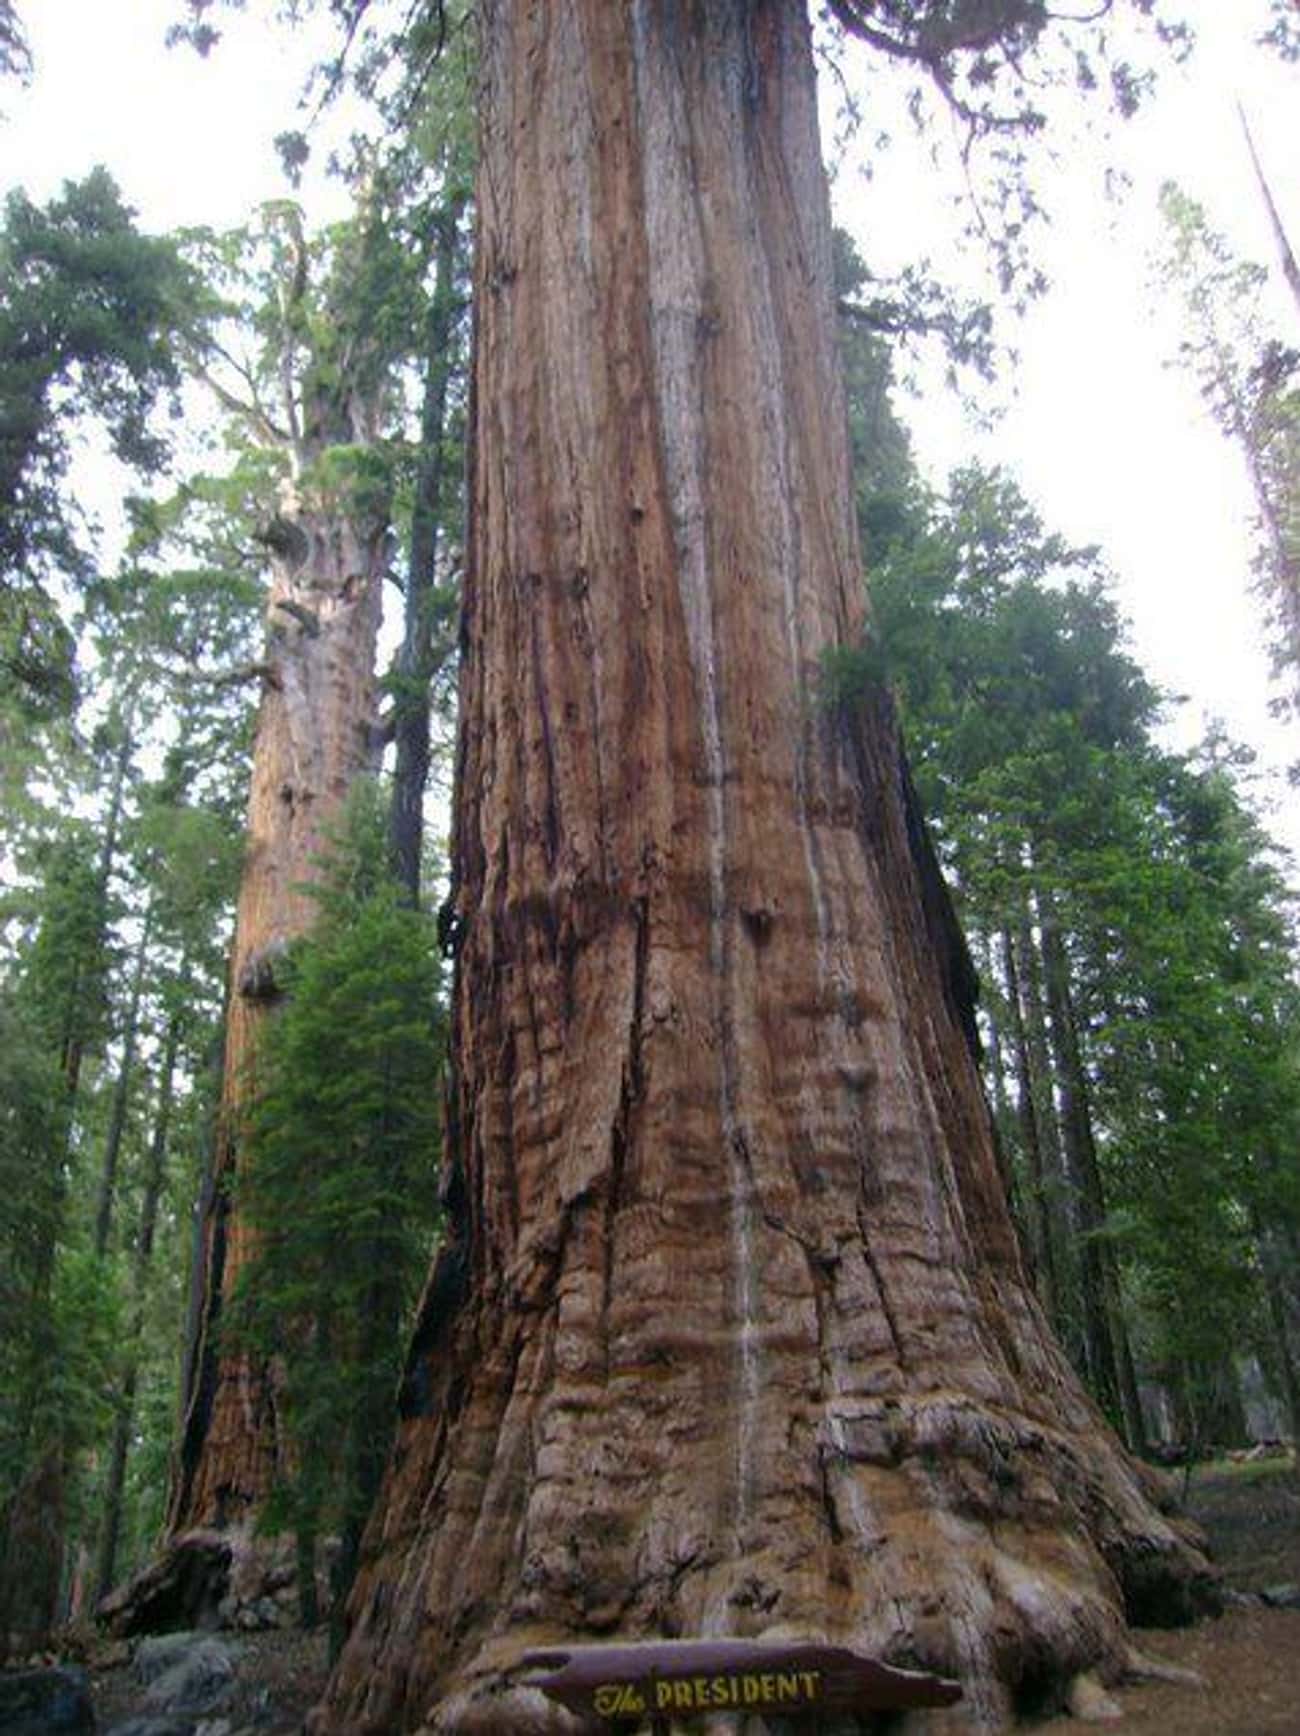 The President, A 3,200-Year-Old Giant Sequoia